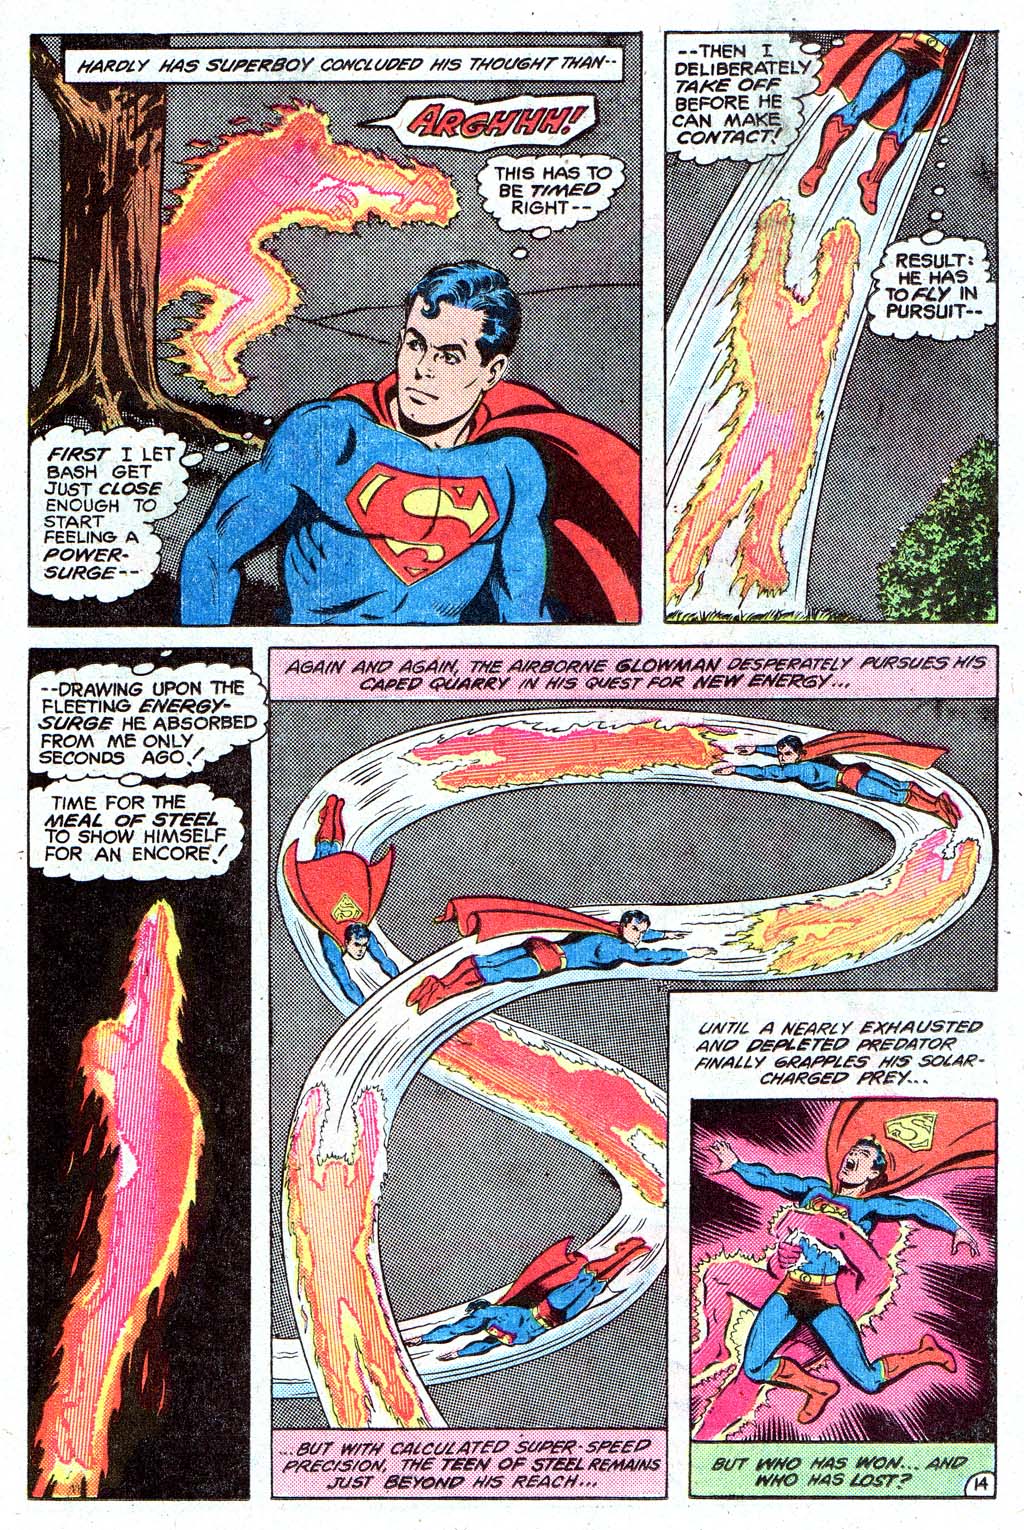 The New Adventures of Superboy 30 Page 18